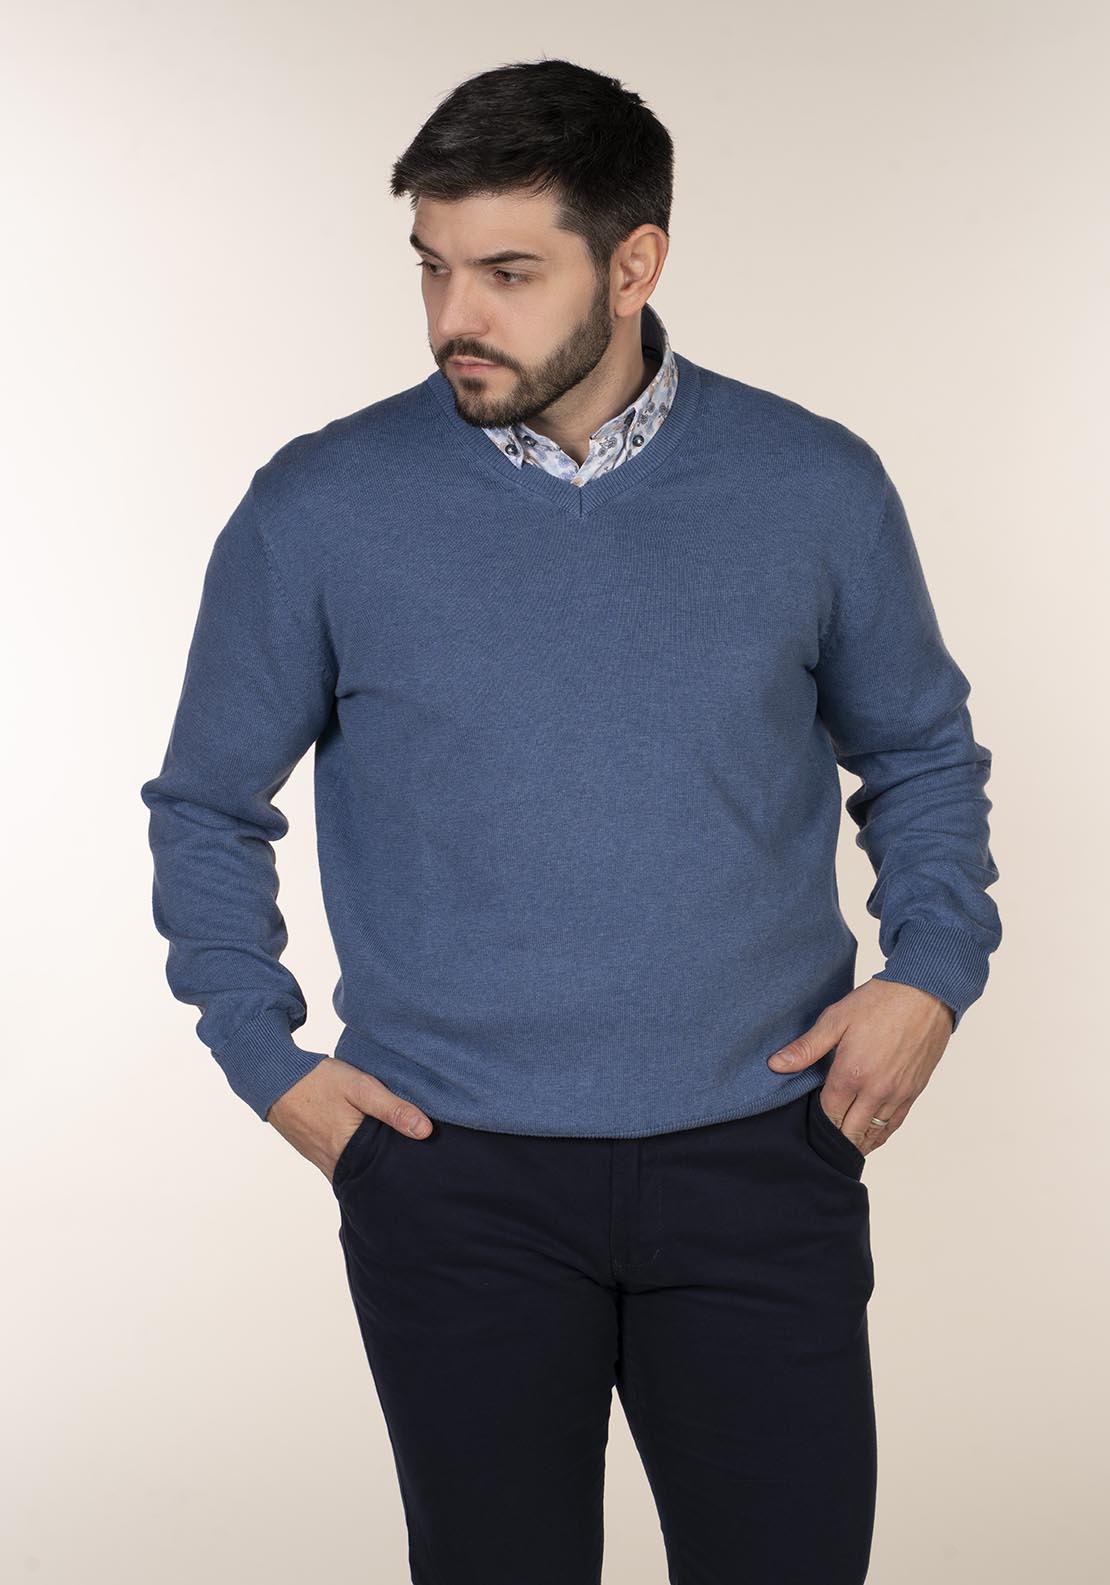 Yeats Plain Cotton V Neck Sweaters - Blue 2 Shaws Department Stores